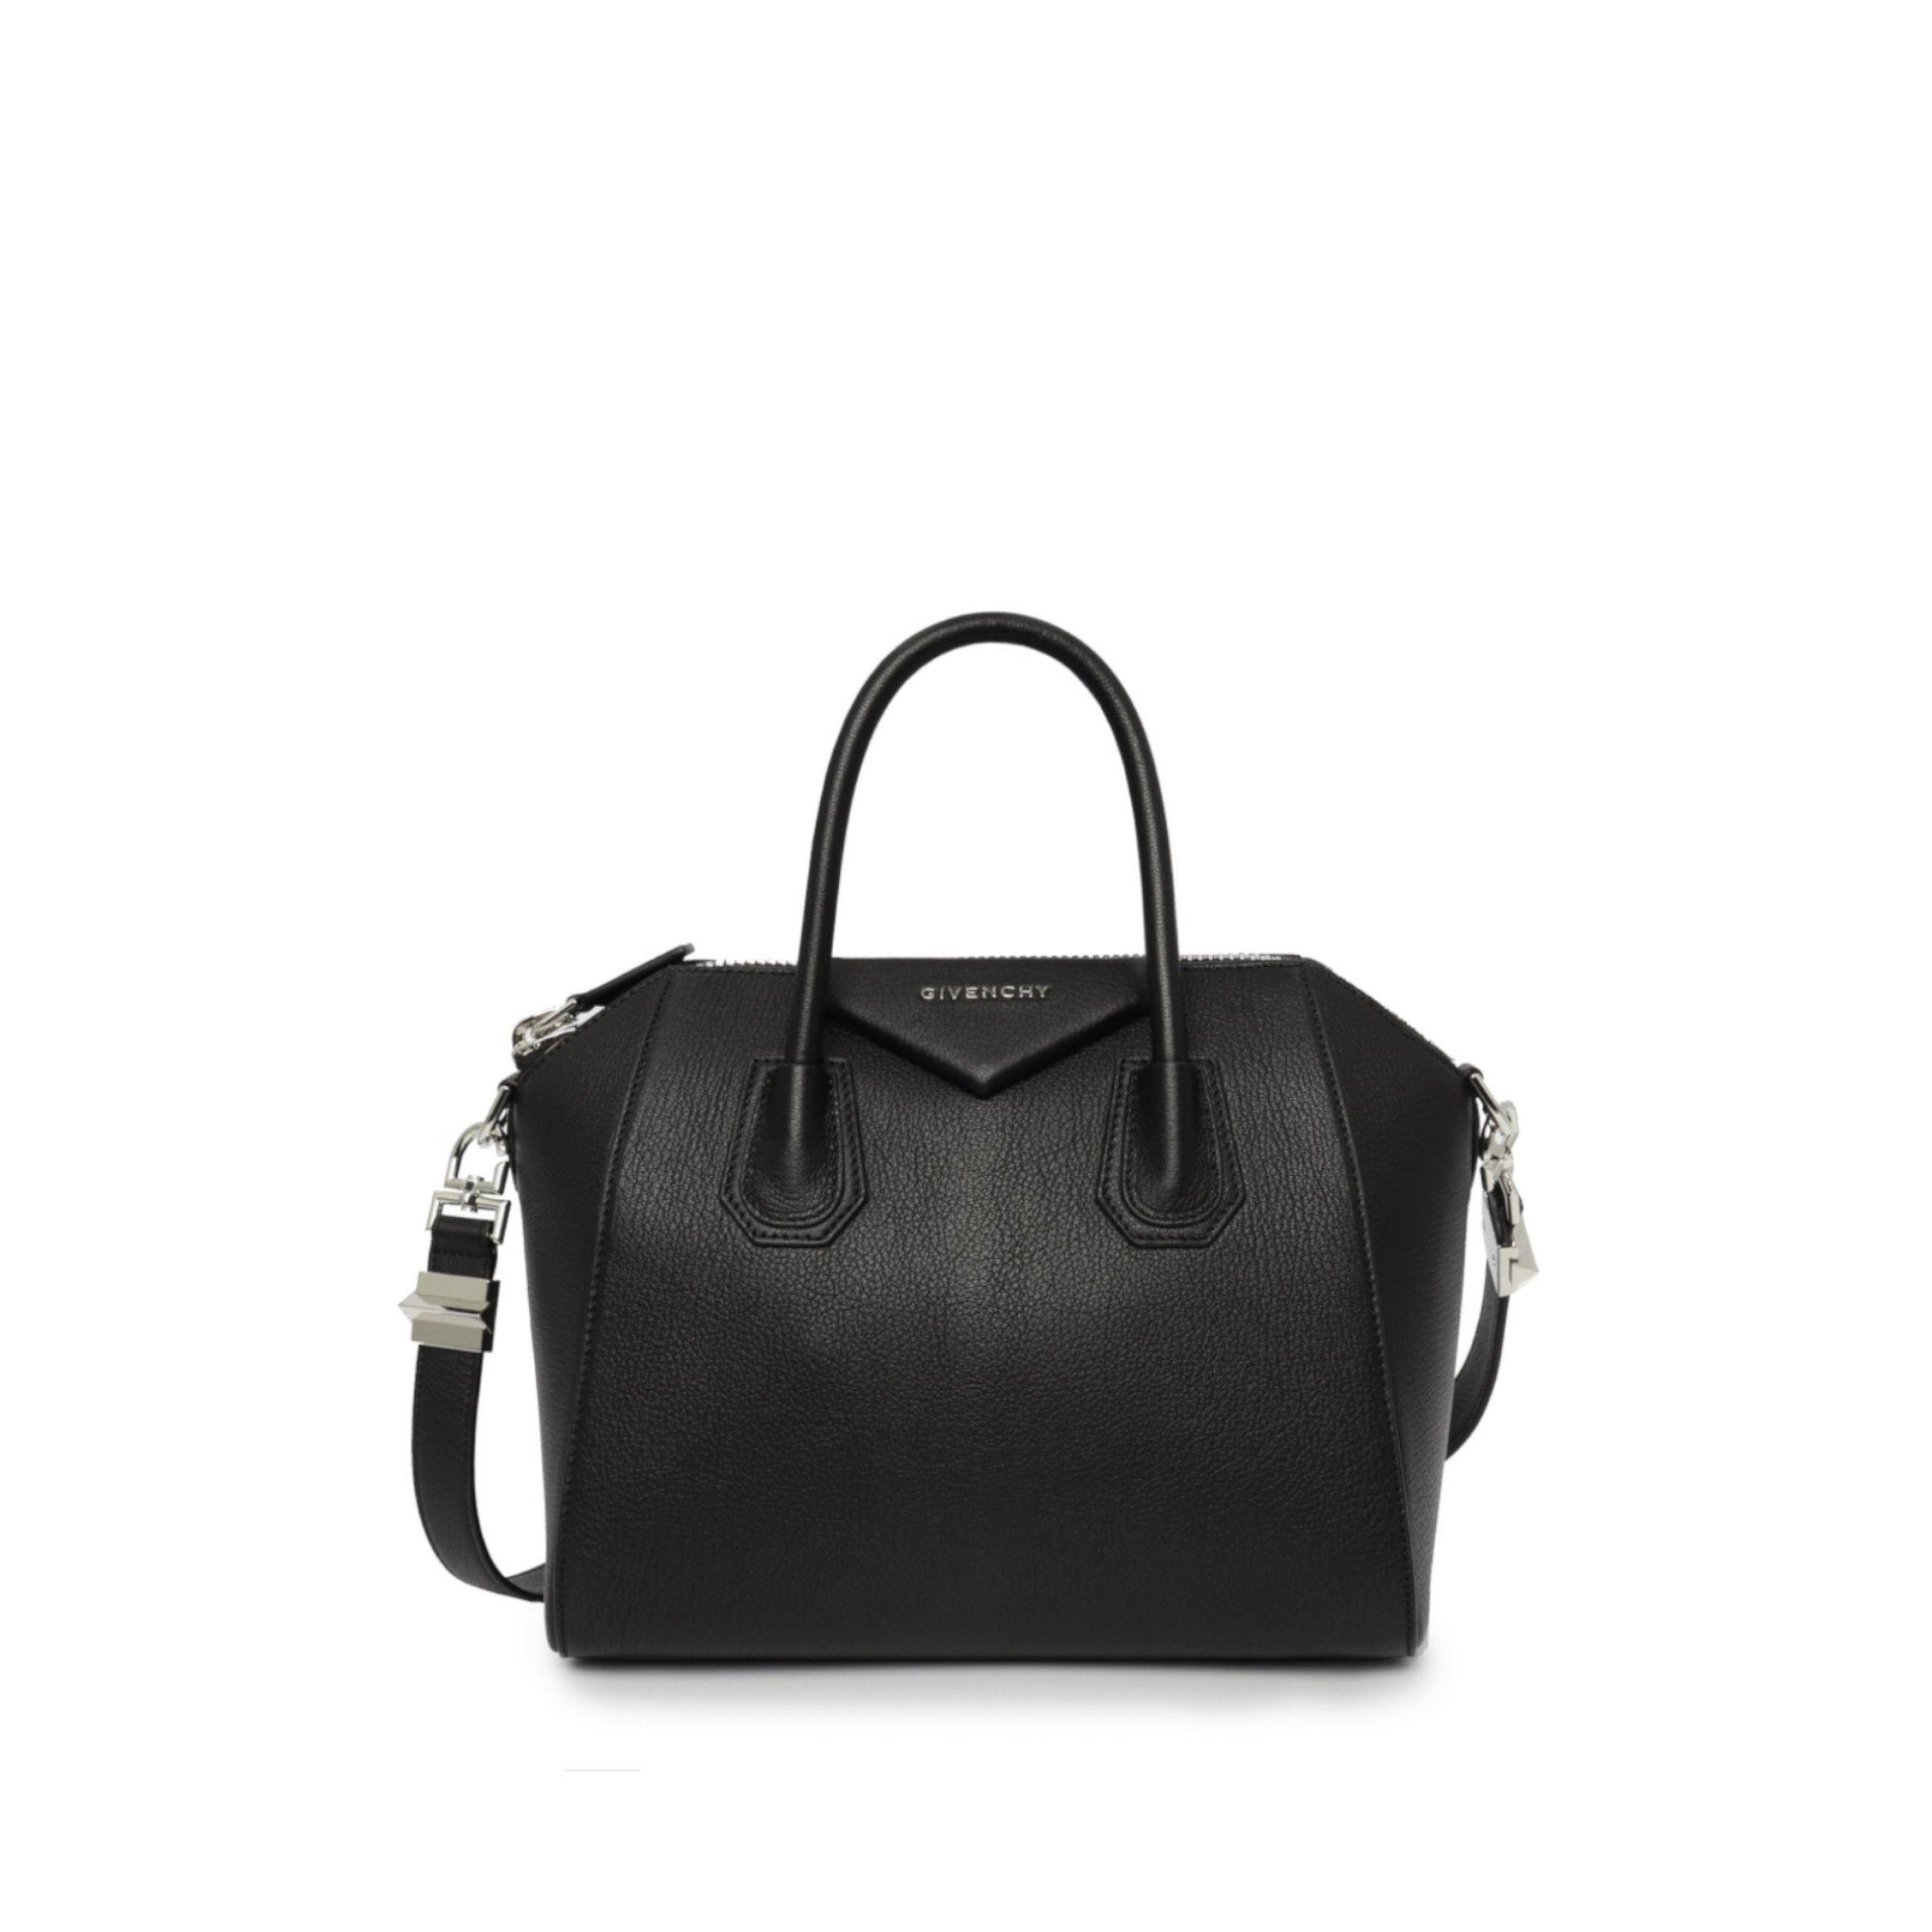 givenchy small antigona bag in grained leather in black sold out sold ...